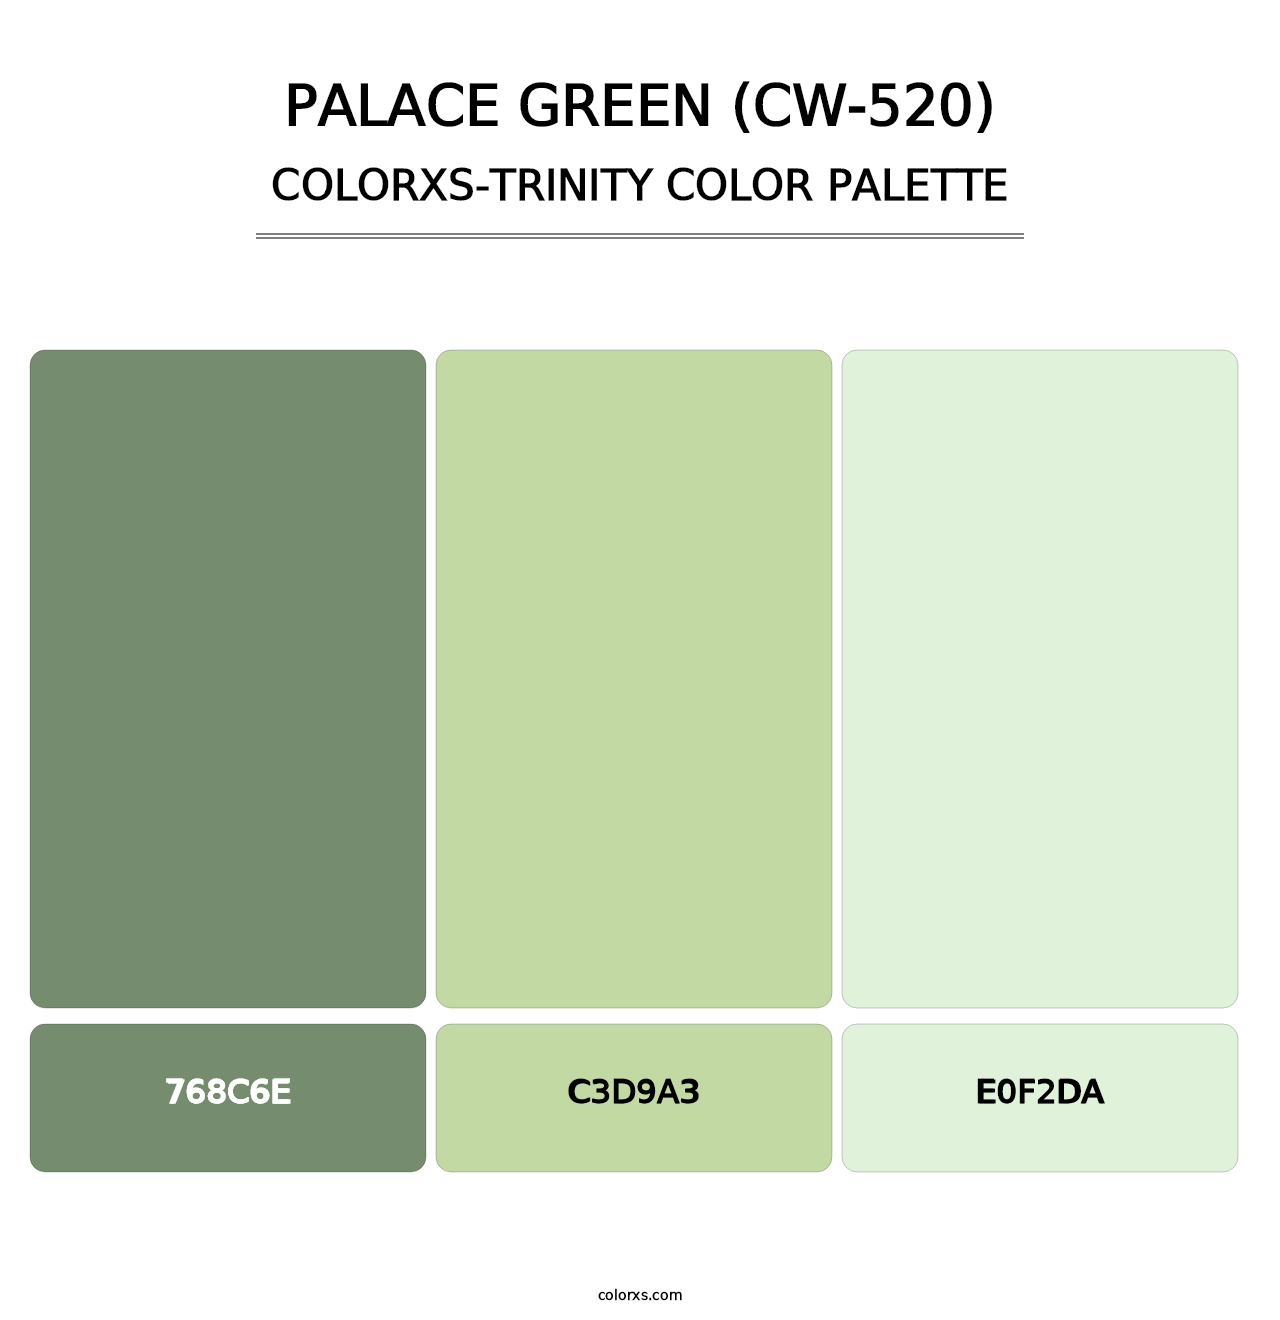 Palace Green (CW-520) - Colorxs Trinity Palette